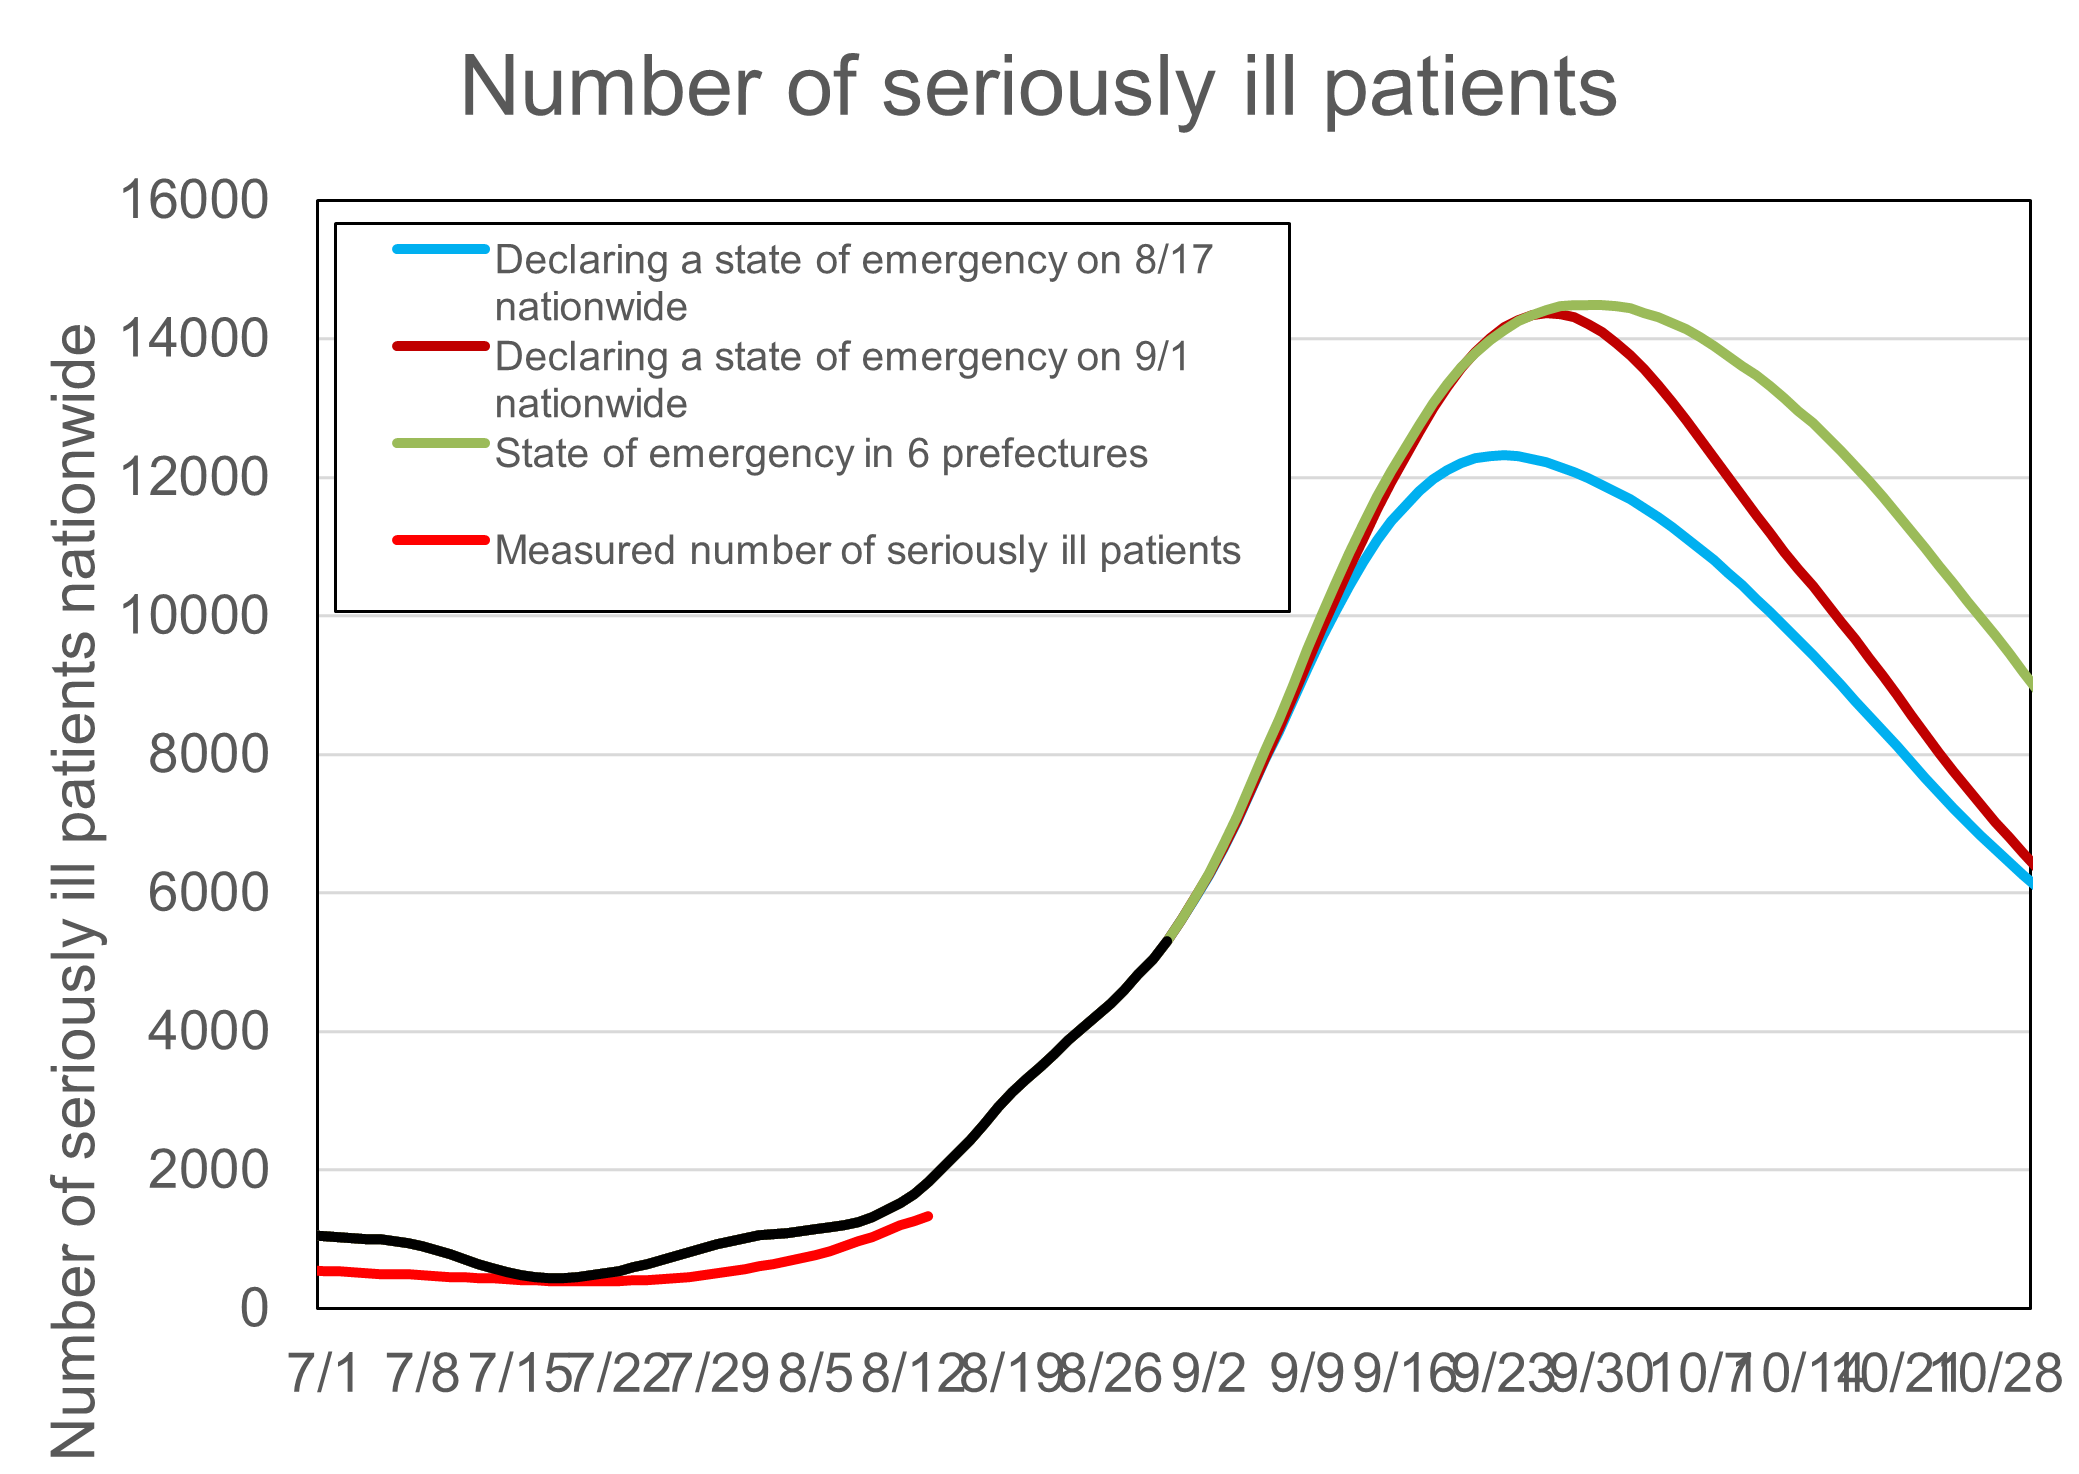 Number of seriously ill patients